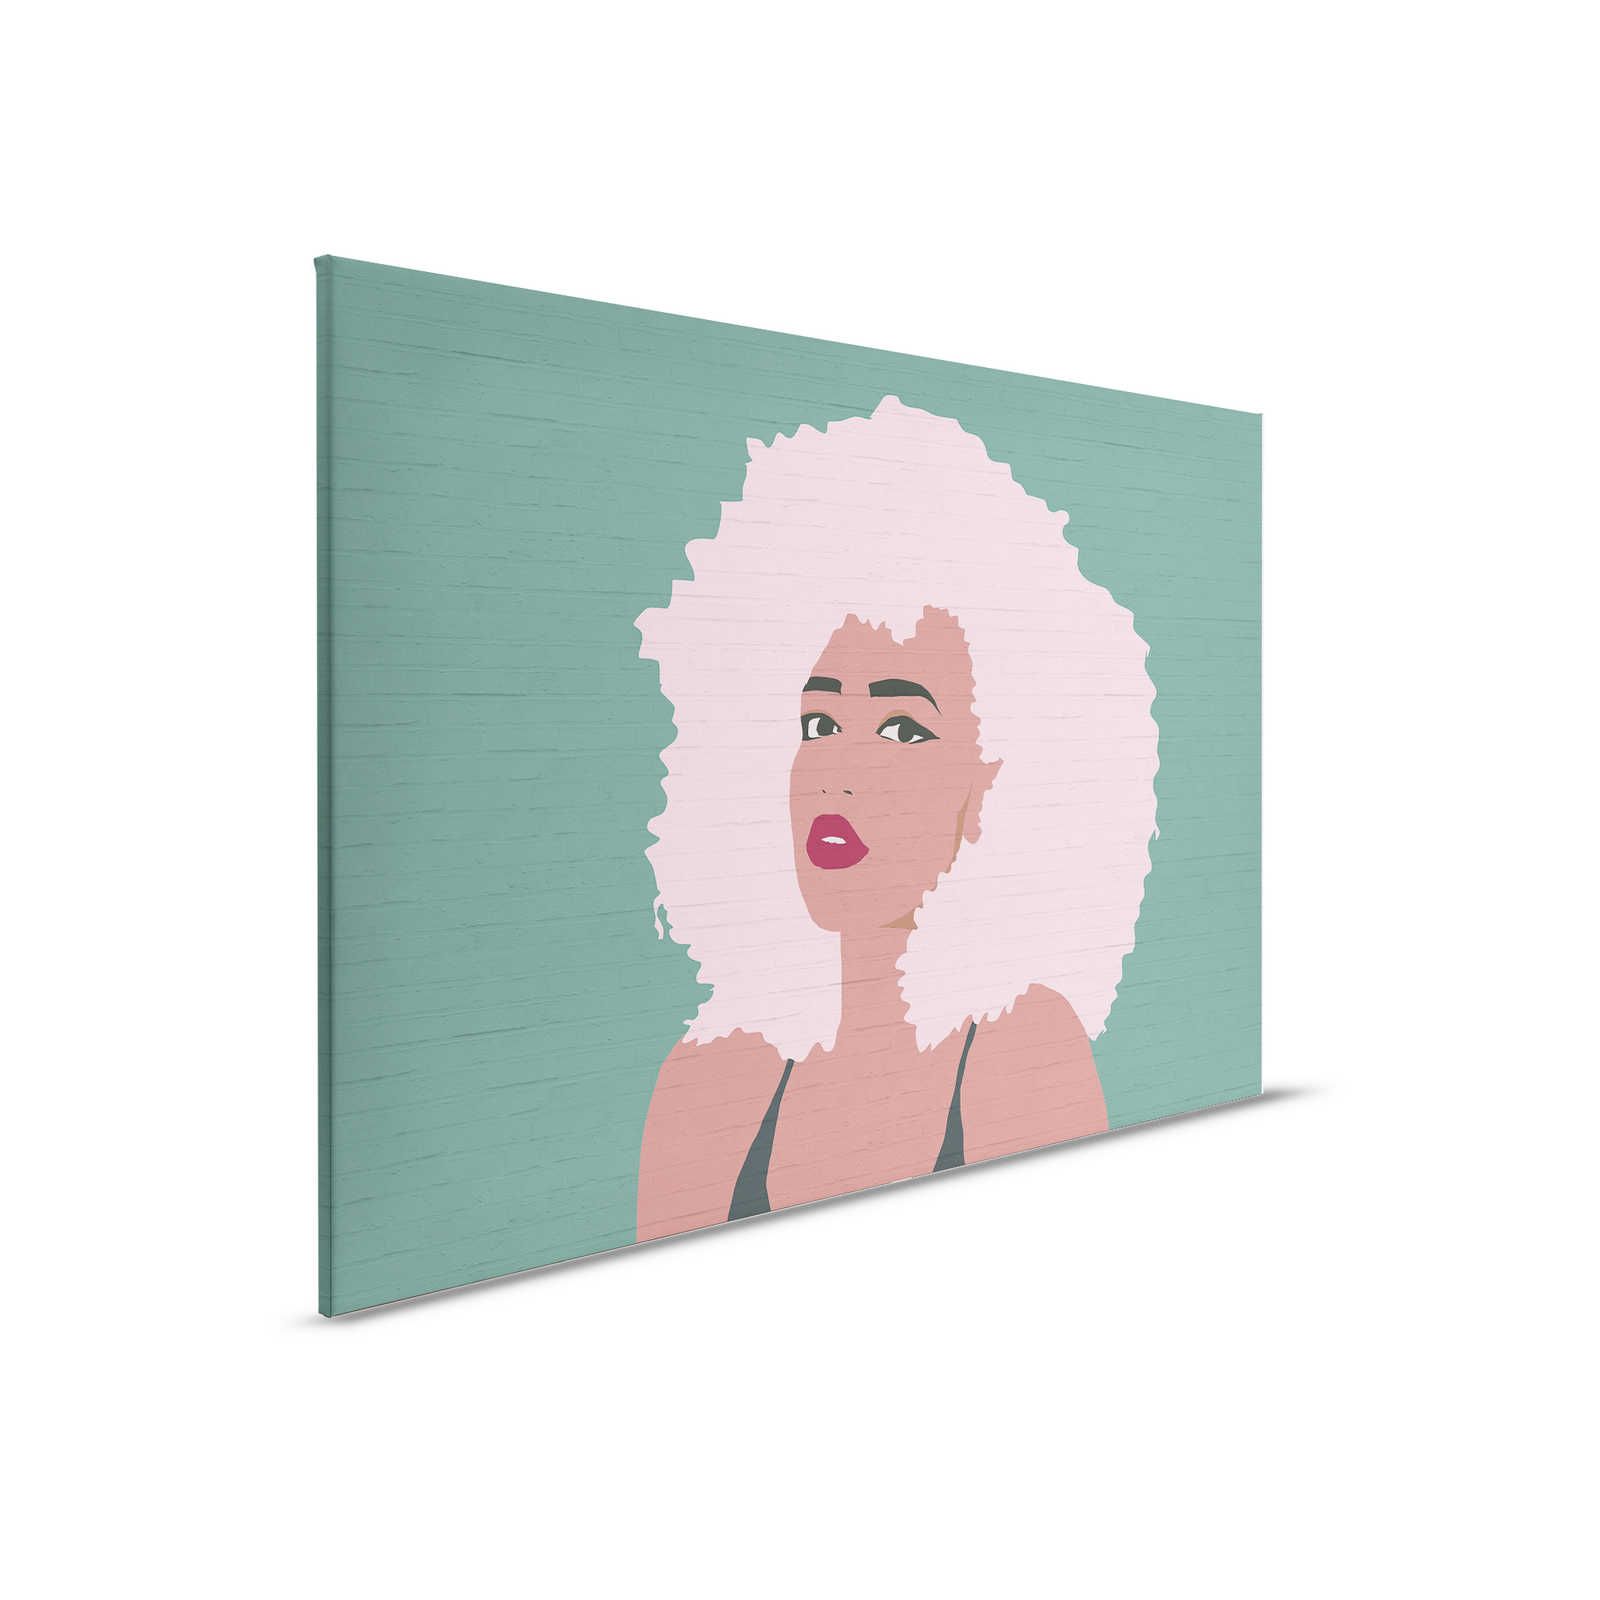         Women's Canvas Painting Whitney in Colour Block Style - 0.90 m x 0.60 m
    